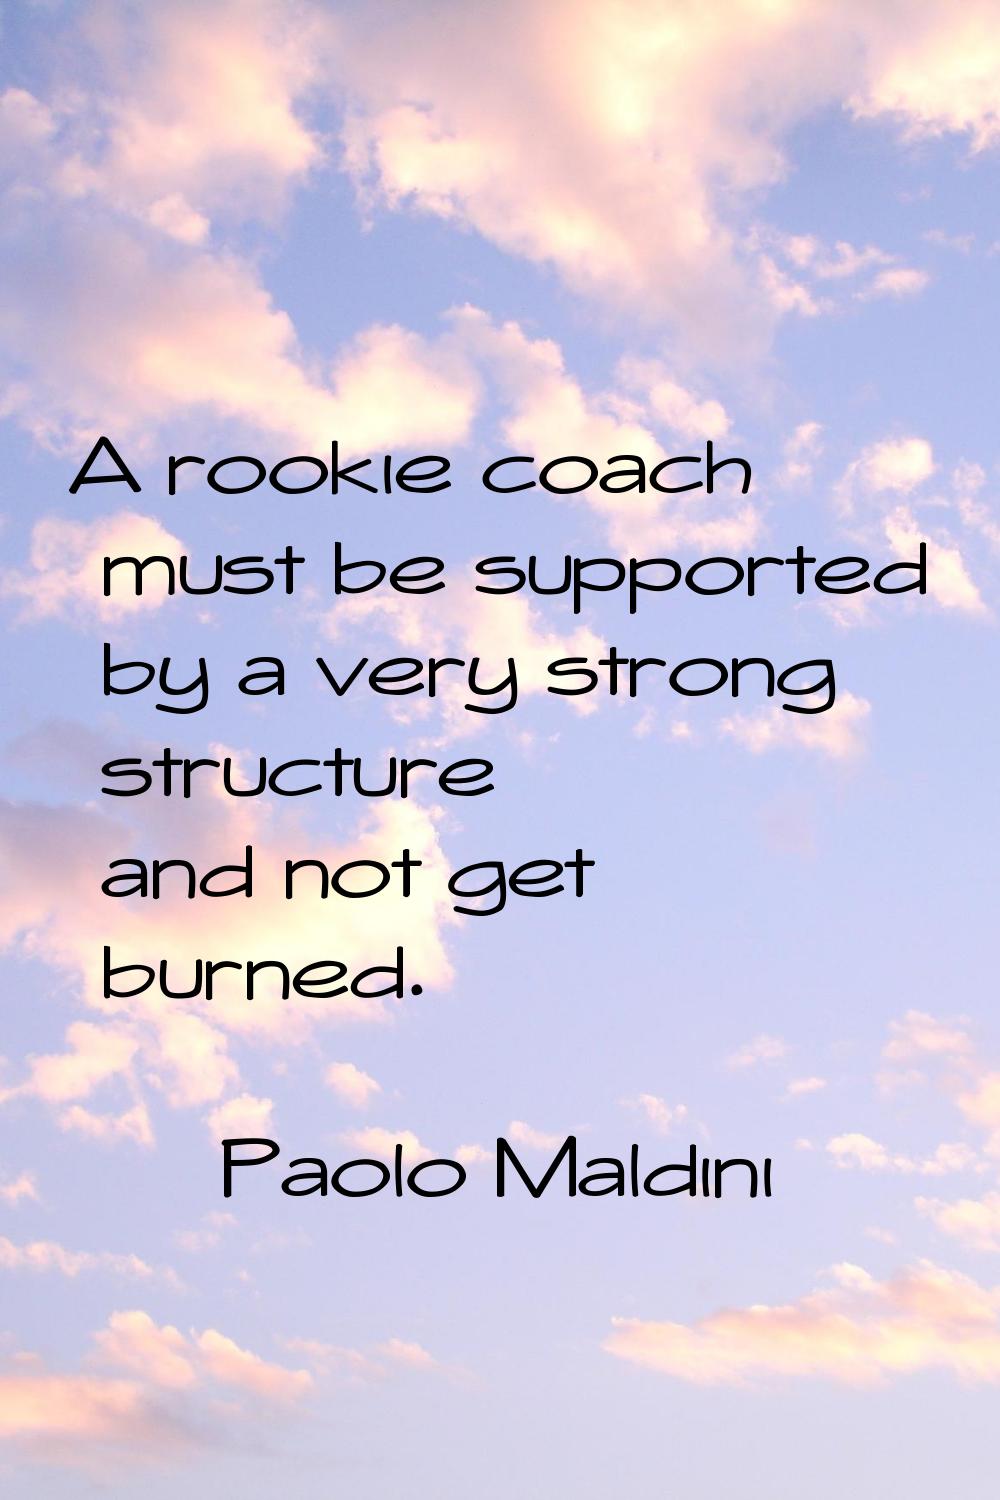 A rookie coach must be supported by a very strong structure and not get burned.